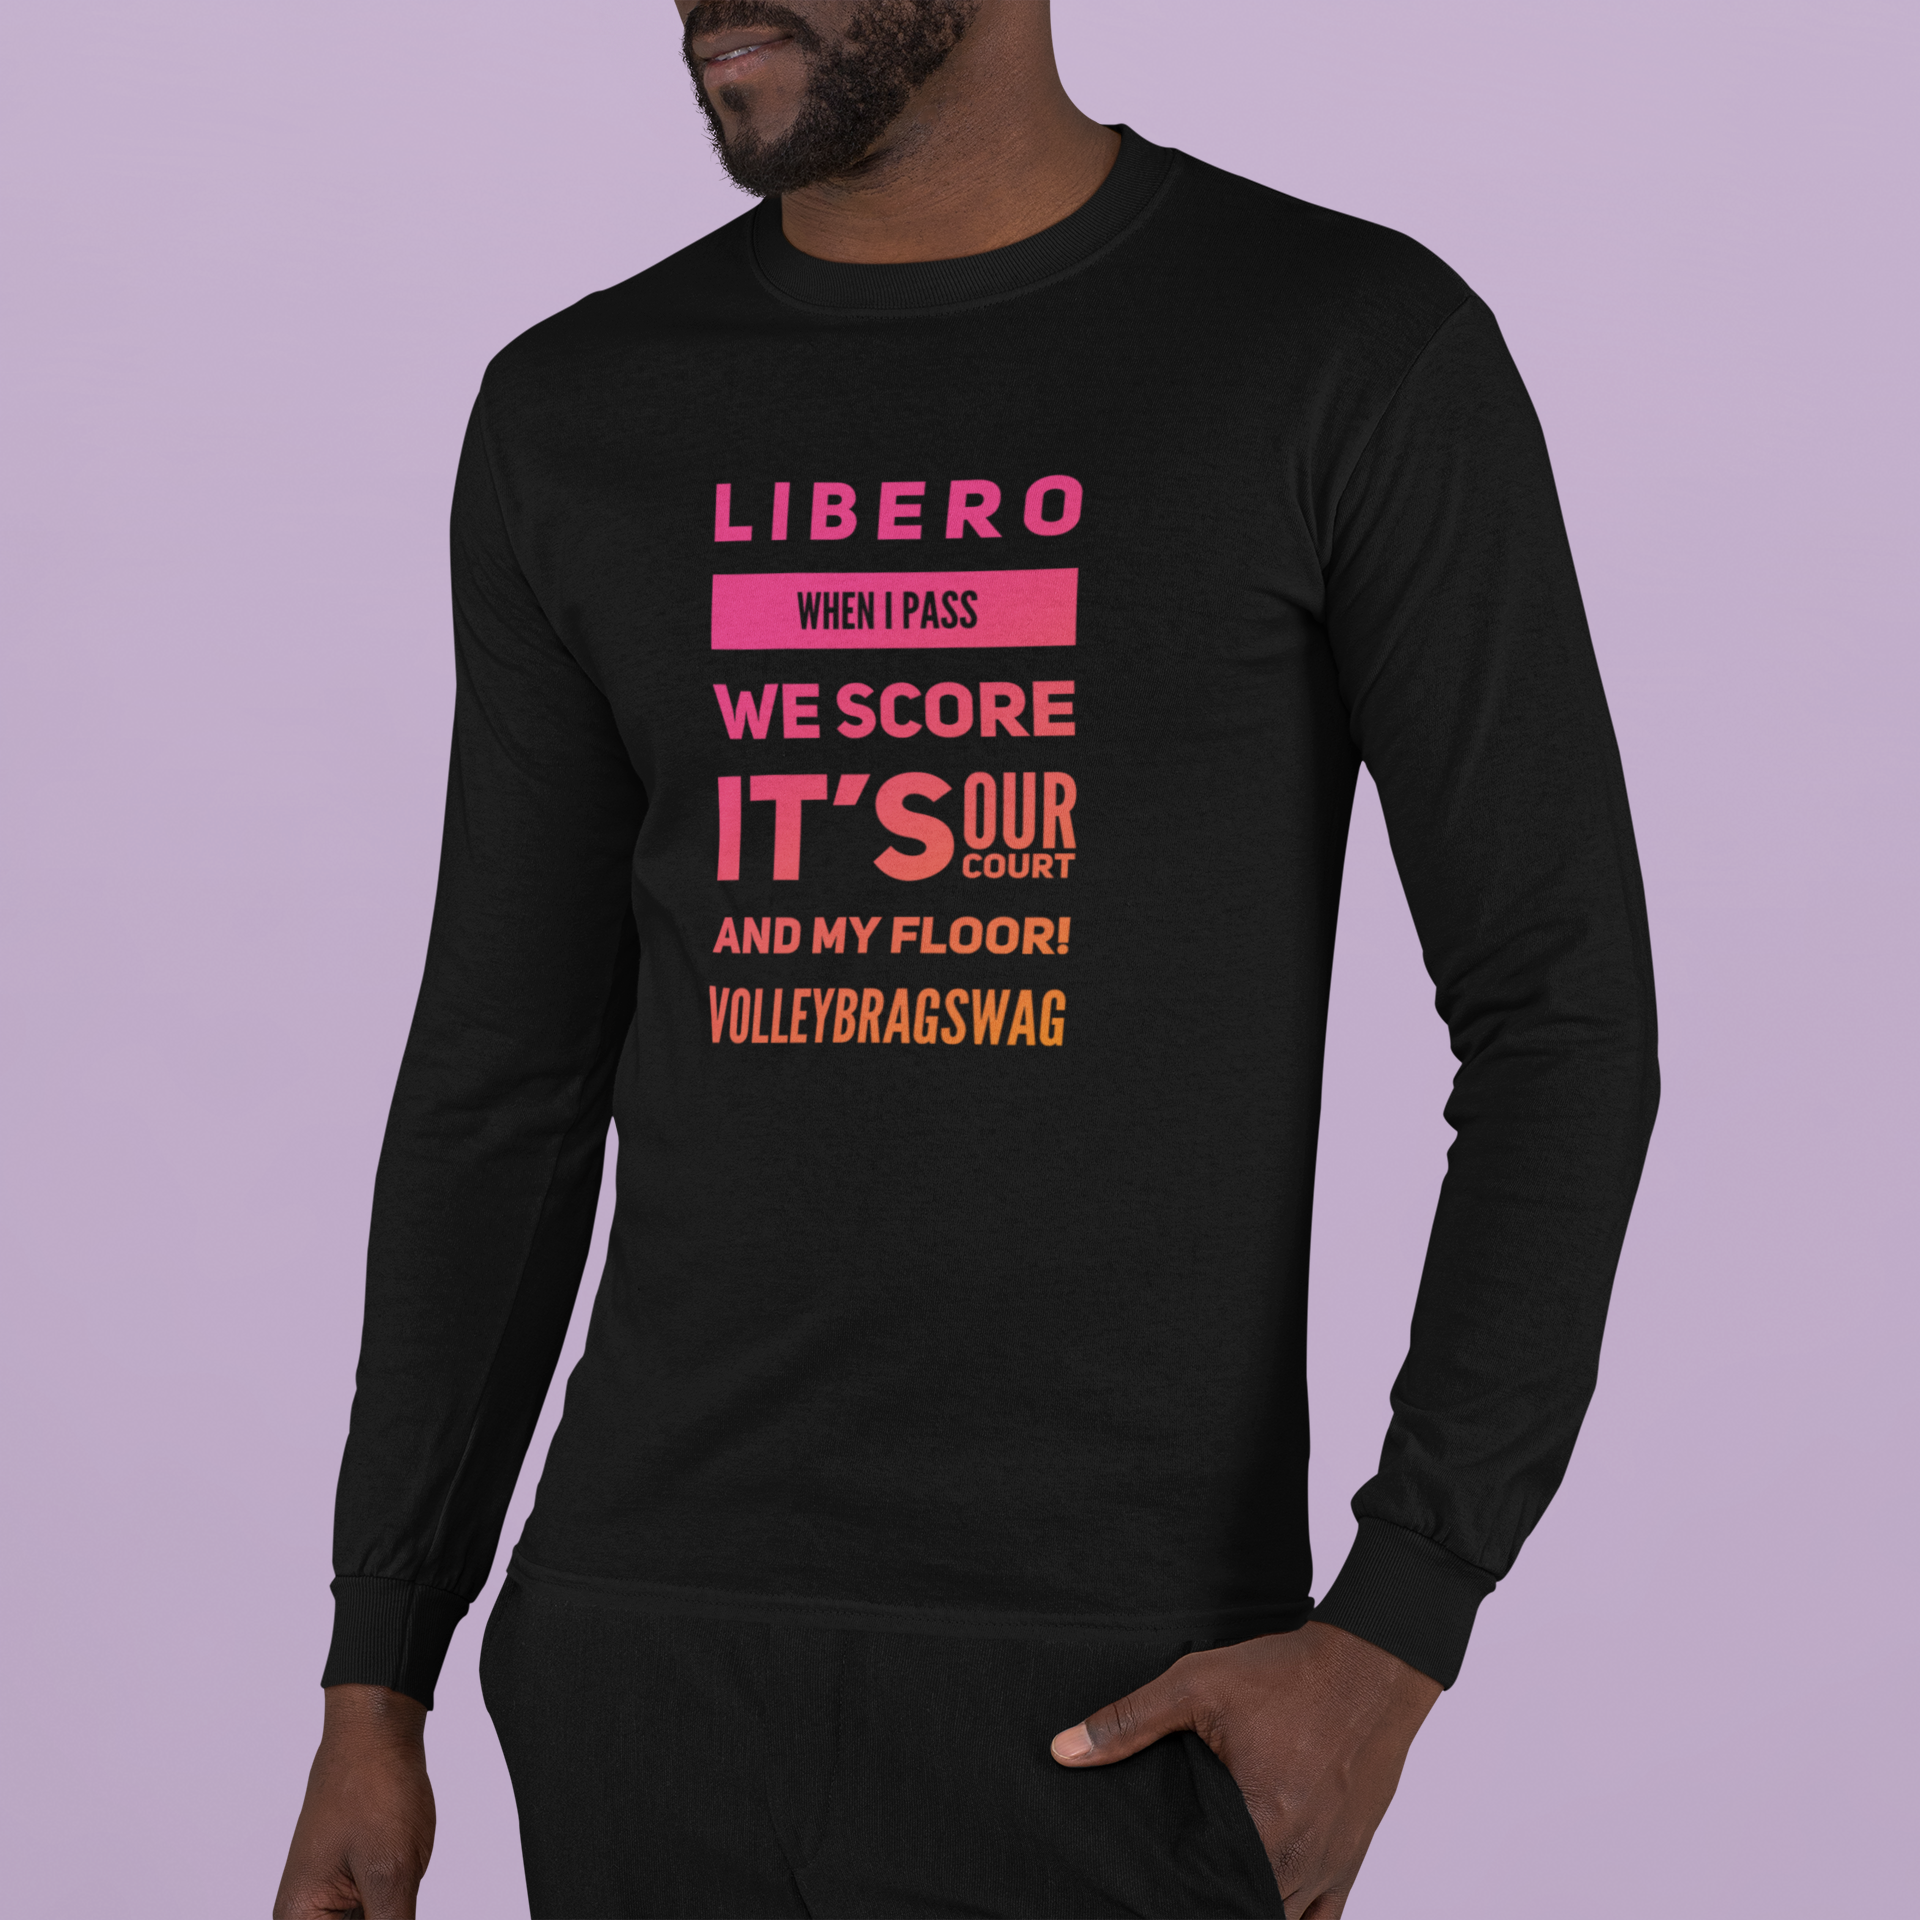 LIBERO When I Dig In The Backcourt I Rule, I Stay Low When You Hit I'm No Fool Dig Your Tips All The Time Picking Up Balls Is My Crime Shirt